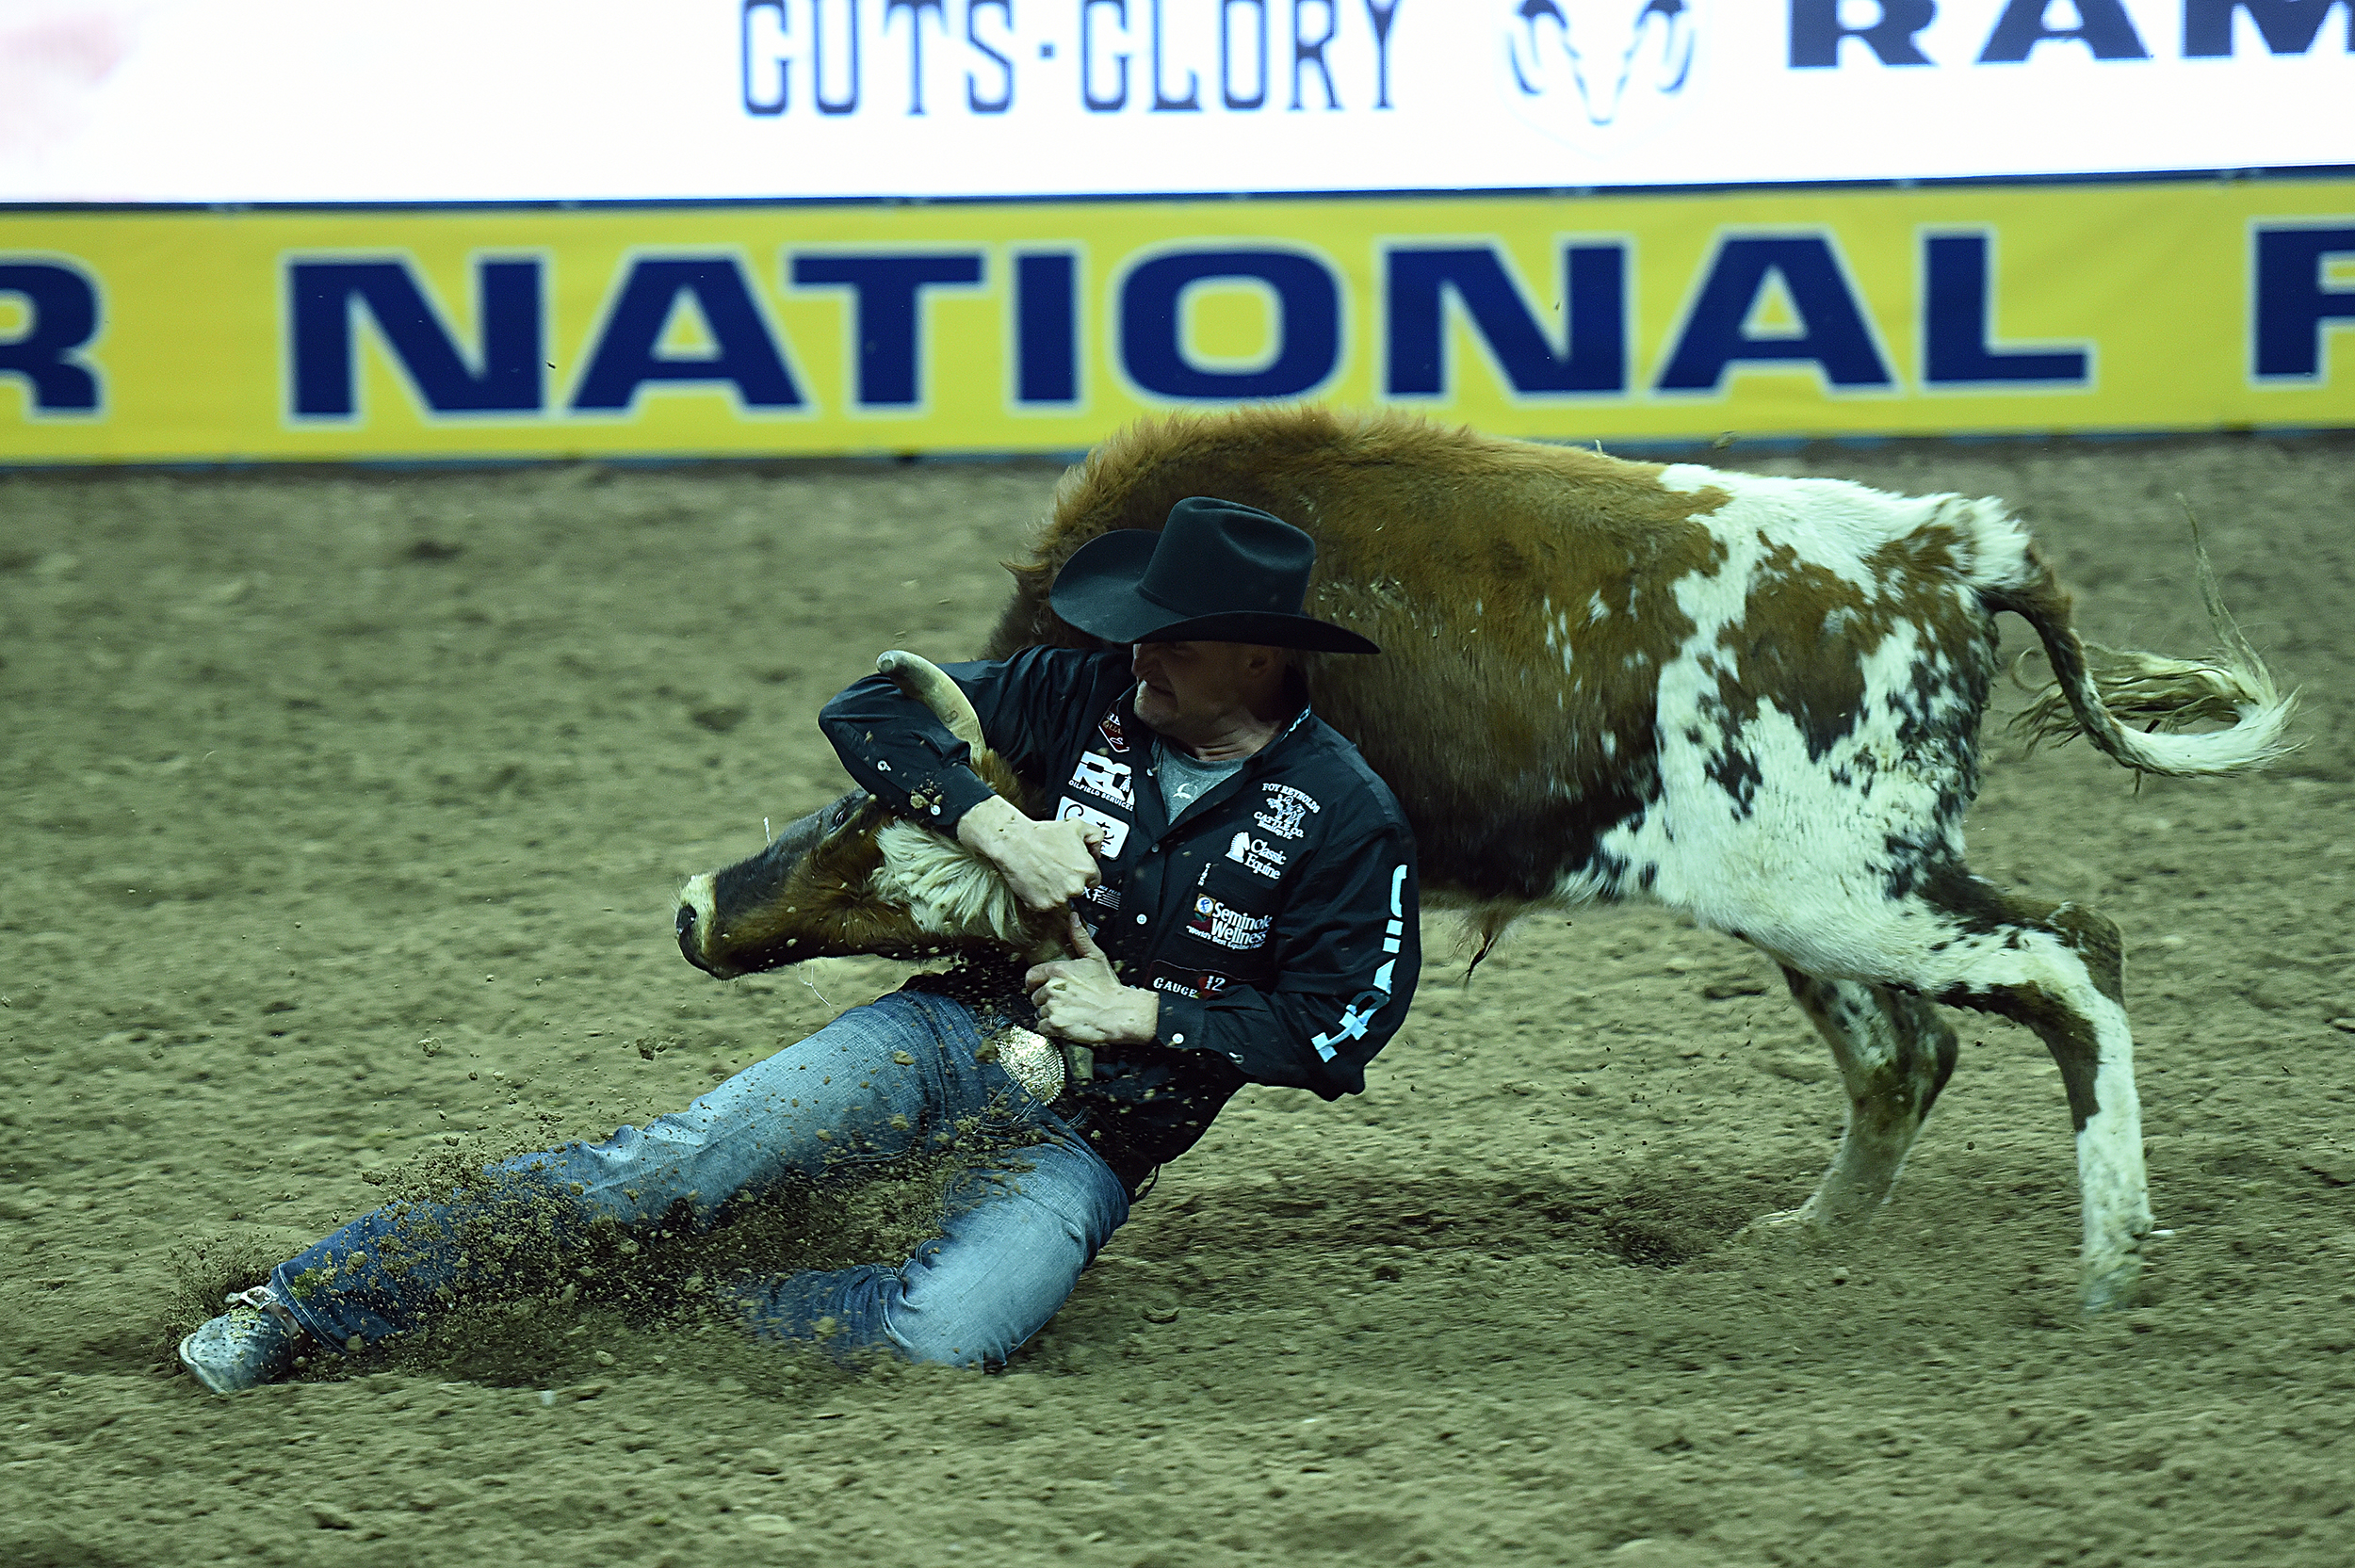 Kyle Irwin wrestled his steer to the ground in 4.0 seconds Thursday night to finish in a tie for third place in the opening round of the National Finals Rodeo. (PHOTO BY ROBBY FREEMAN)